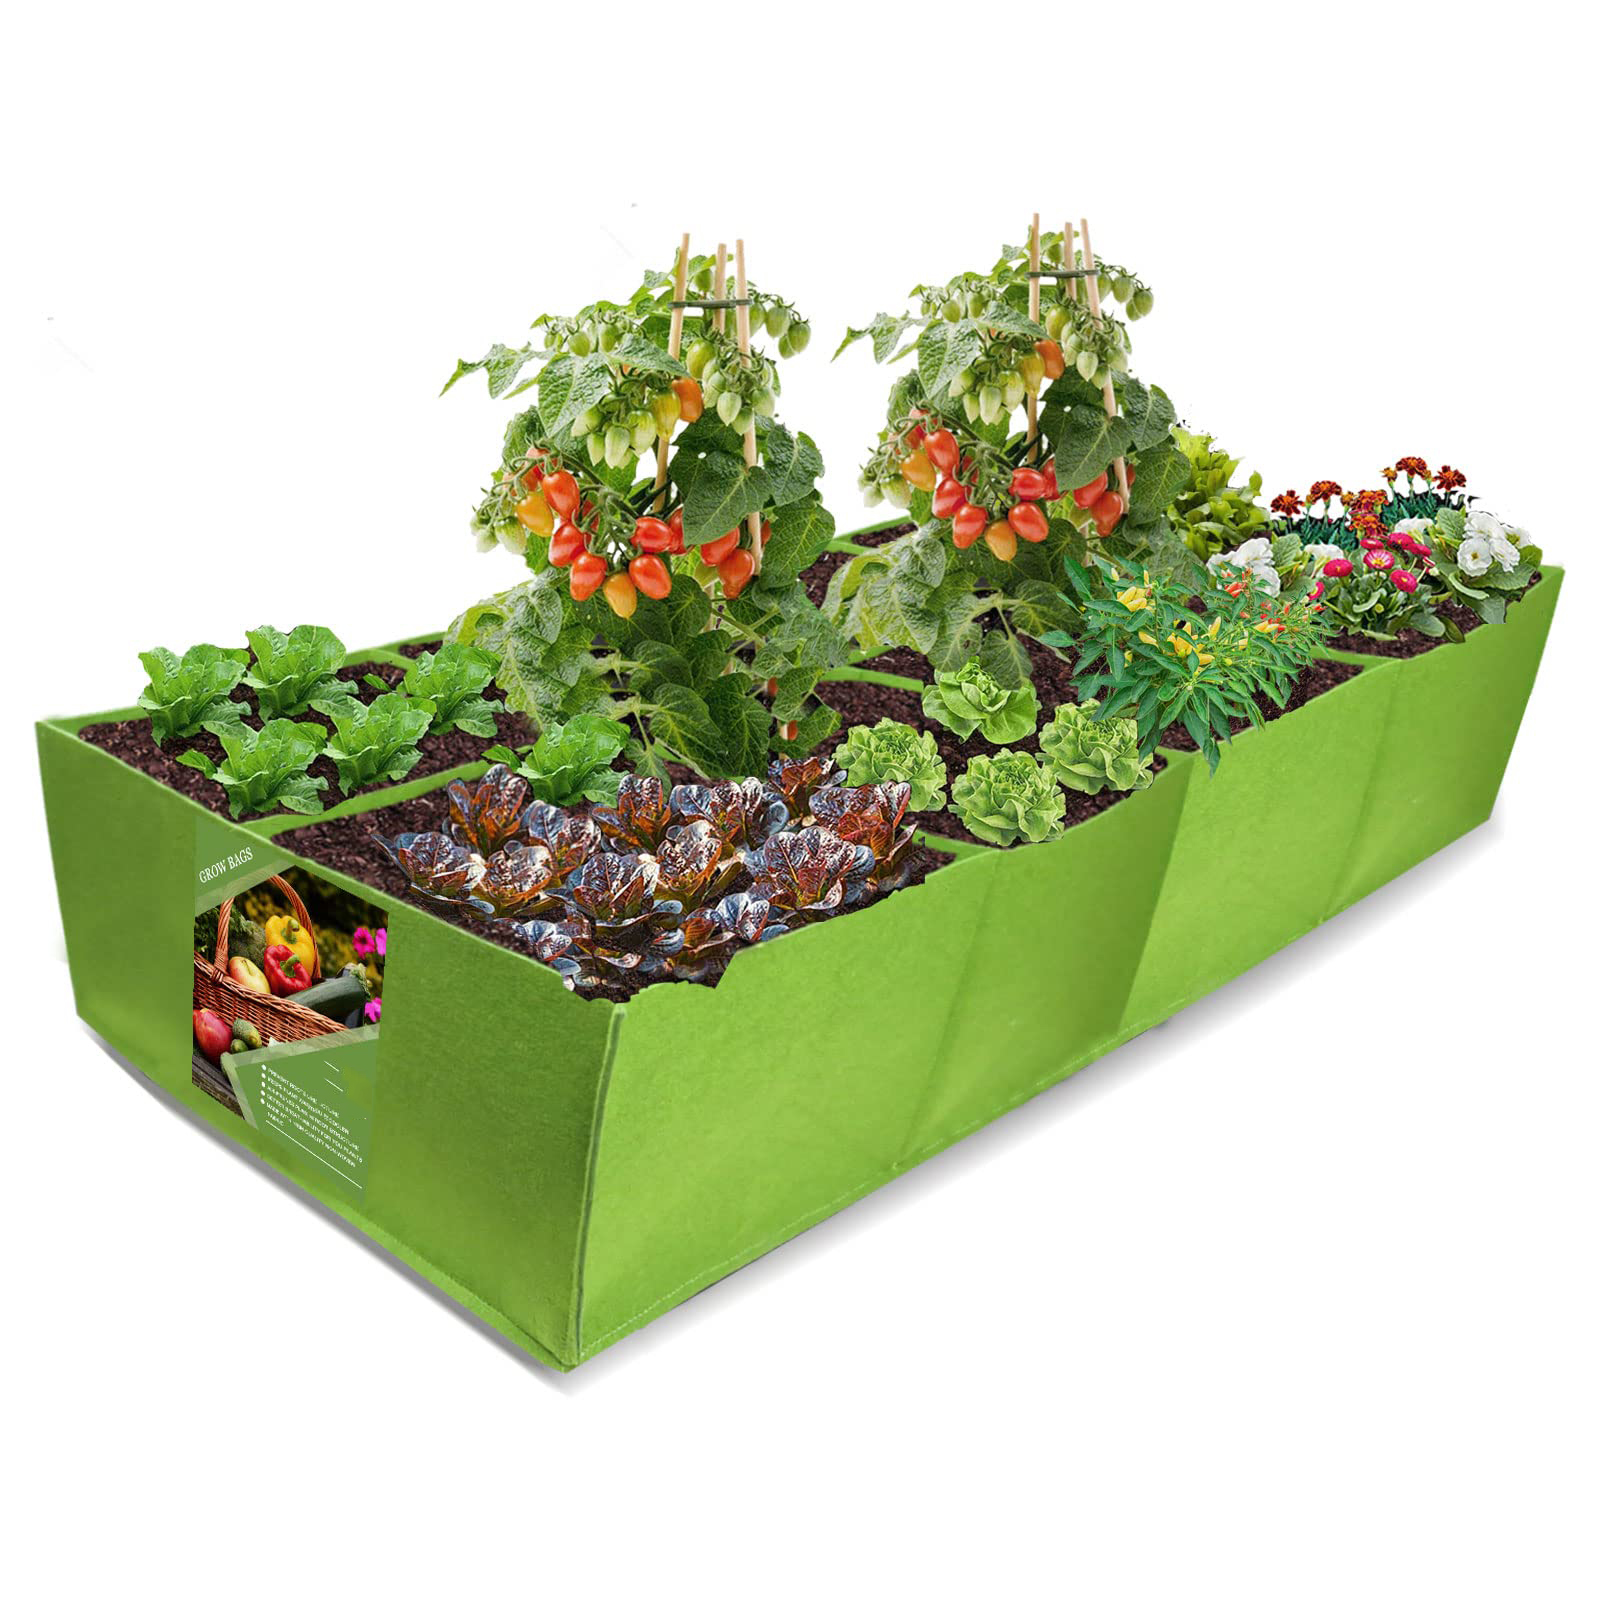 Fabric raised garden bed square plant growth bag Large durable rectangular reusable vegetable breathing cloth container 4 mesh reusable